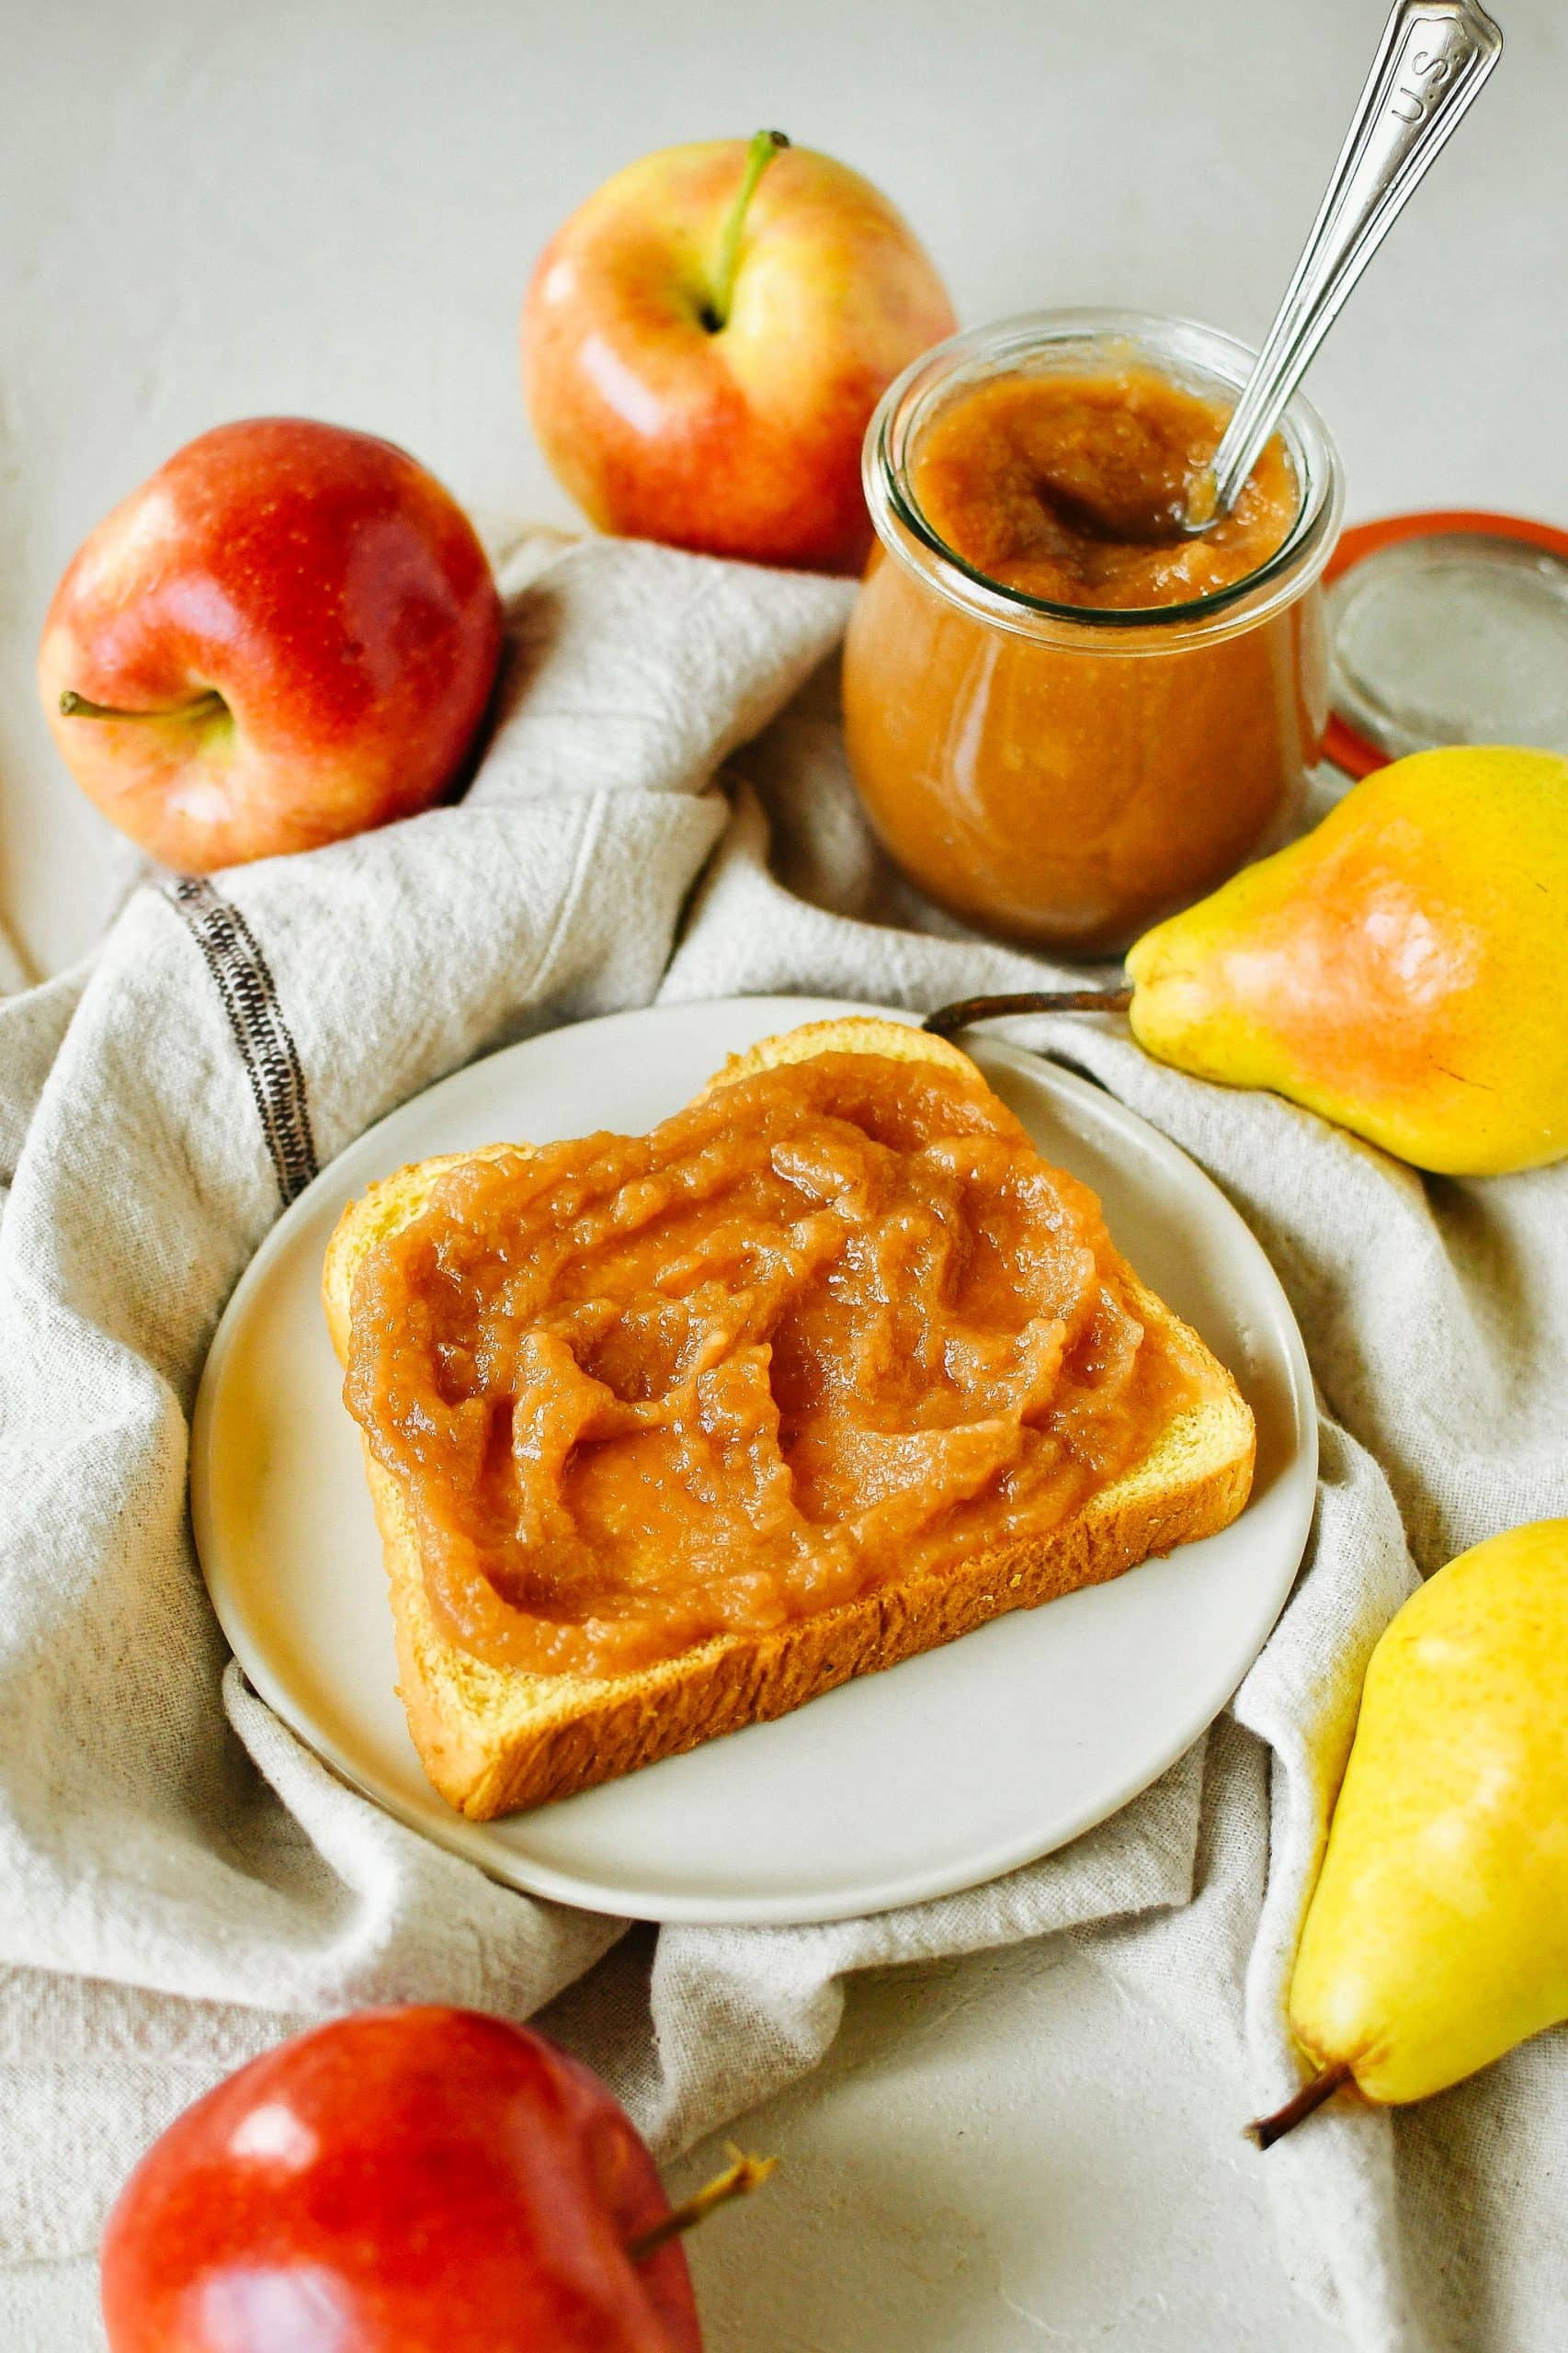 Piece of toast on a white plate, smothered in apple-pear butter, with apple and pear fruits arranged around the plate next to a jar of apple-pear butter